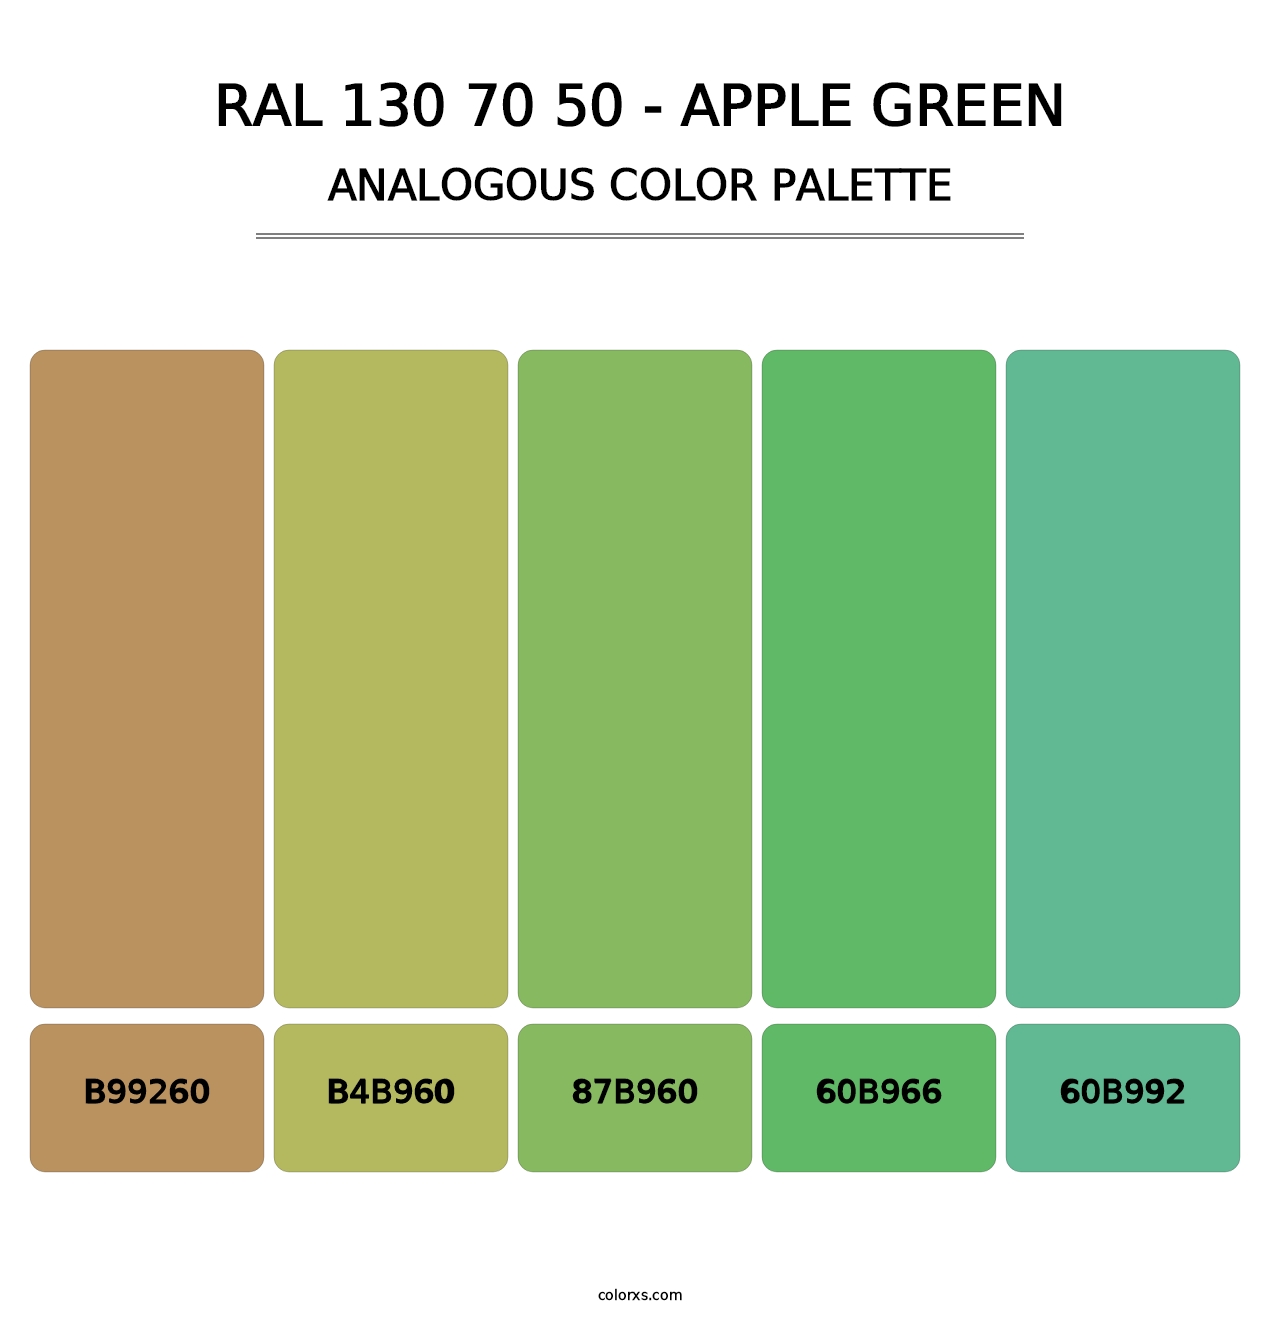 RAL 130 70 50 - Apple Green - Analogous Color Palette